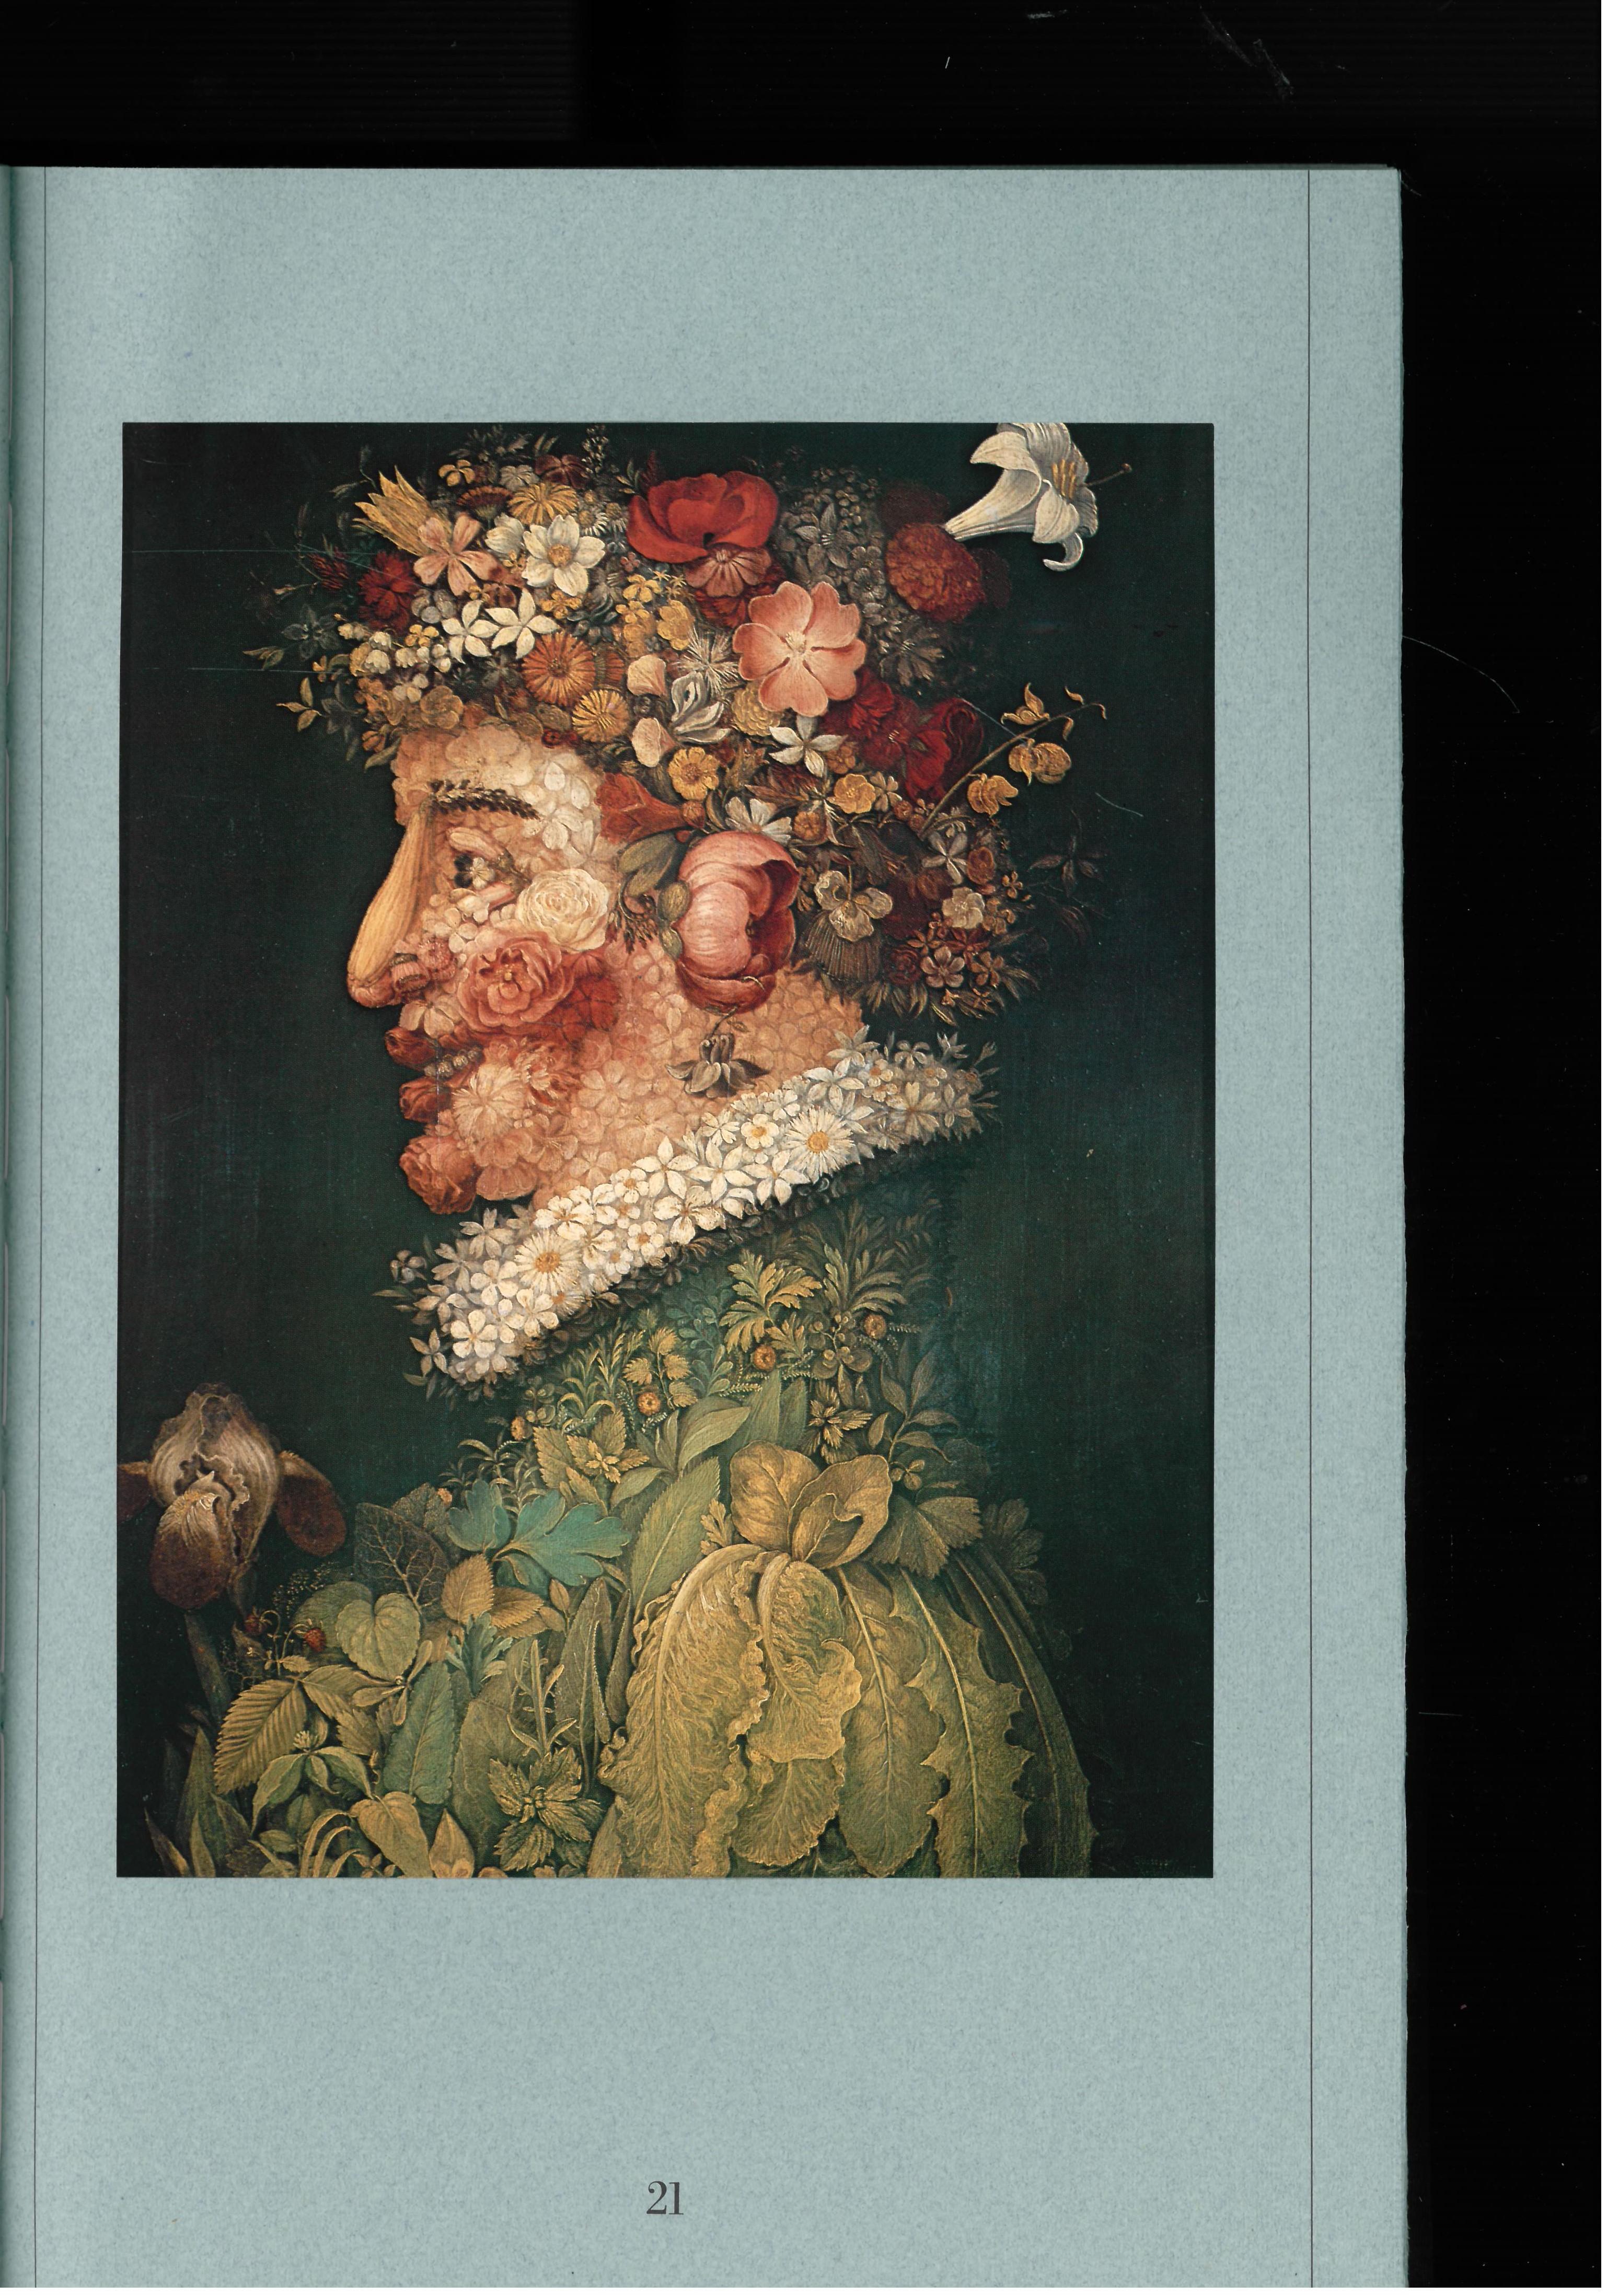 A beautifully produced book by Franco Maria Ricci, one of a limited edition of 3,000 numbered copies, this being 388. 175 pages with tipped in color plates with additional drawings and sketches, the text is in English. Arcimboldo has become best